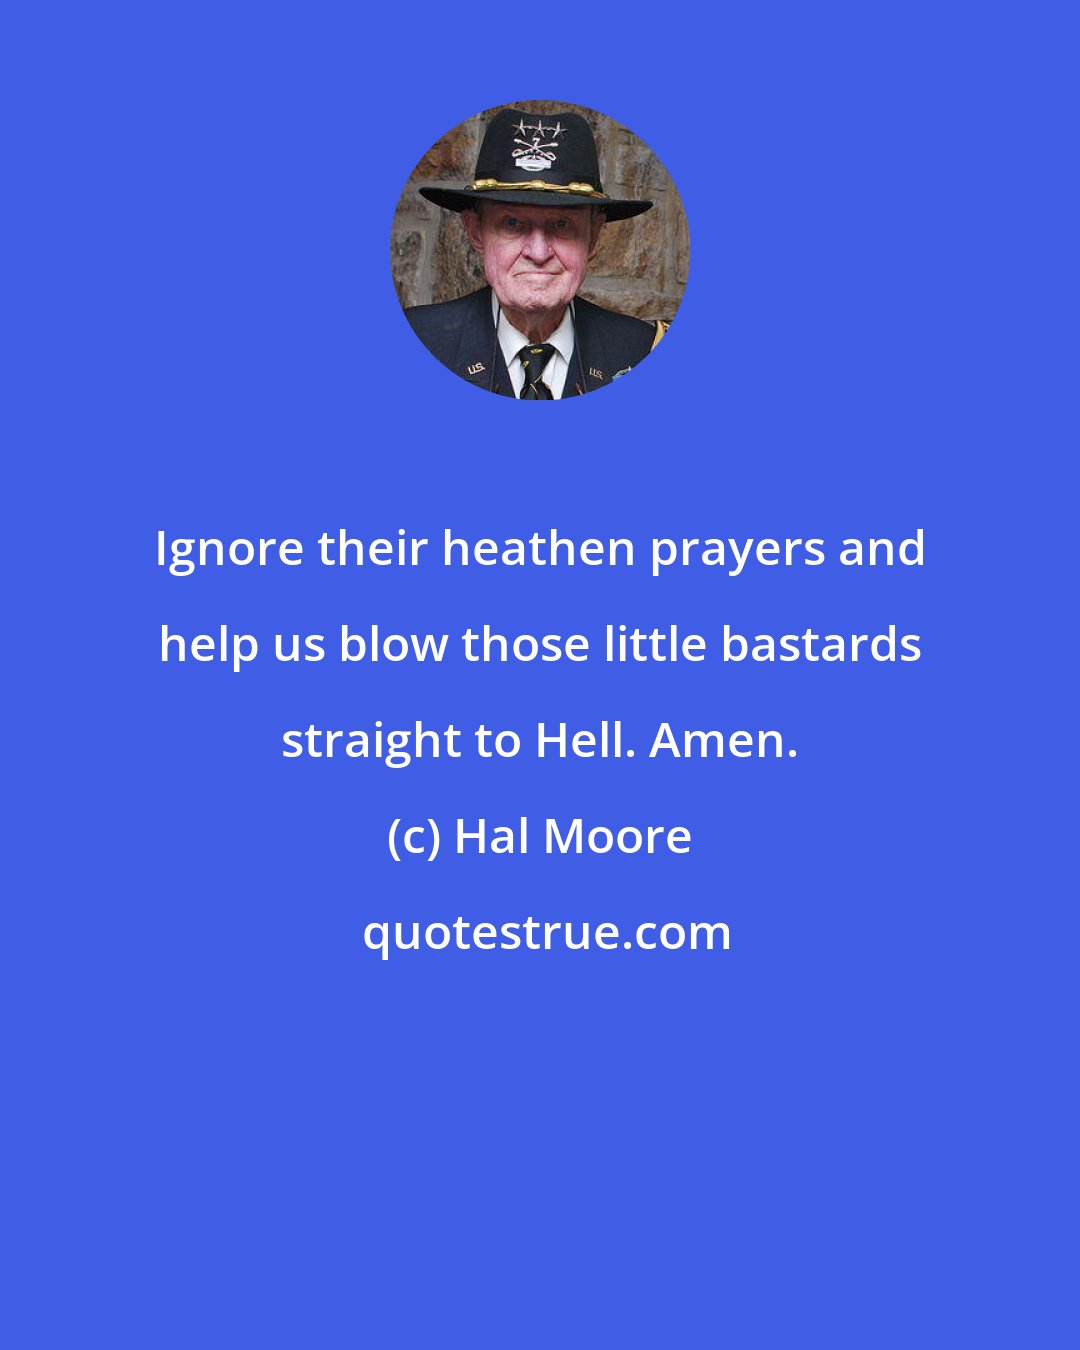 Hal Moore: Ignore their heathen prayers and help us blow those little bastards straight to Hell. Amen.